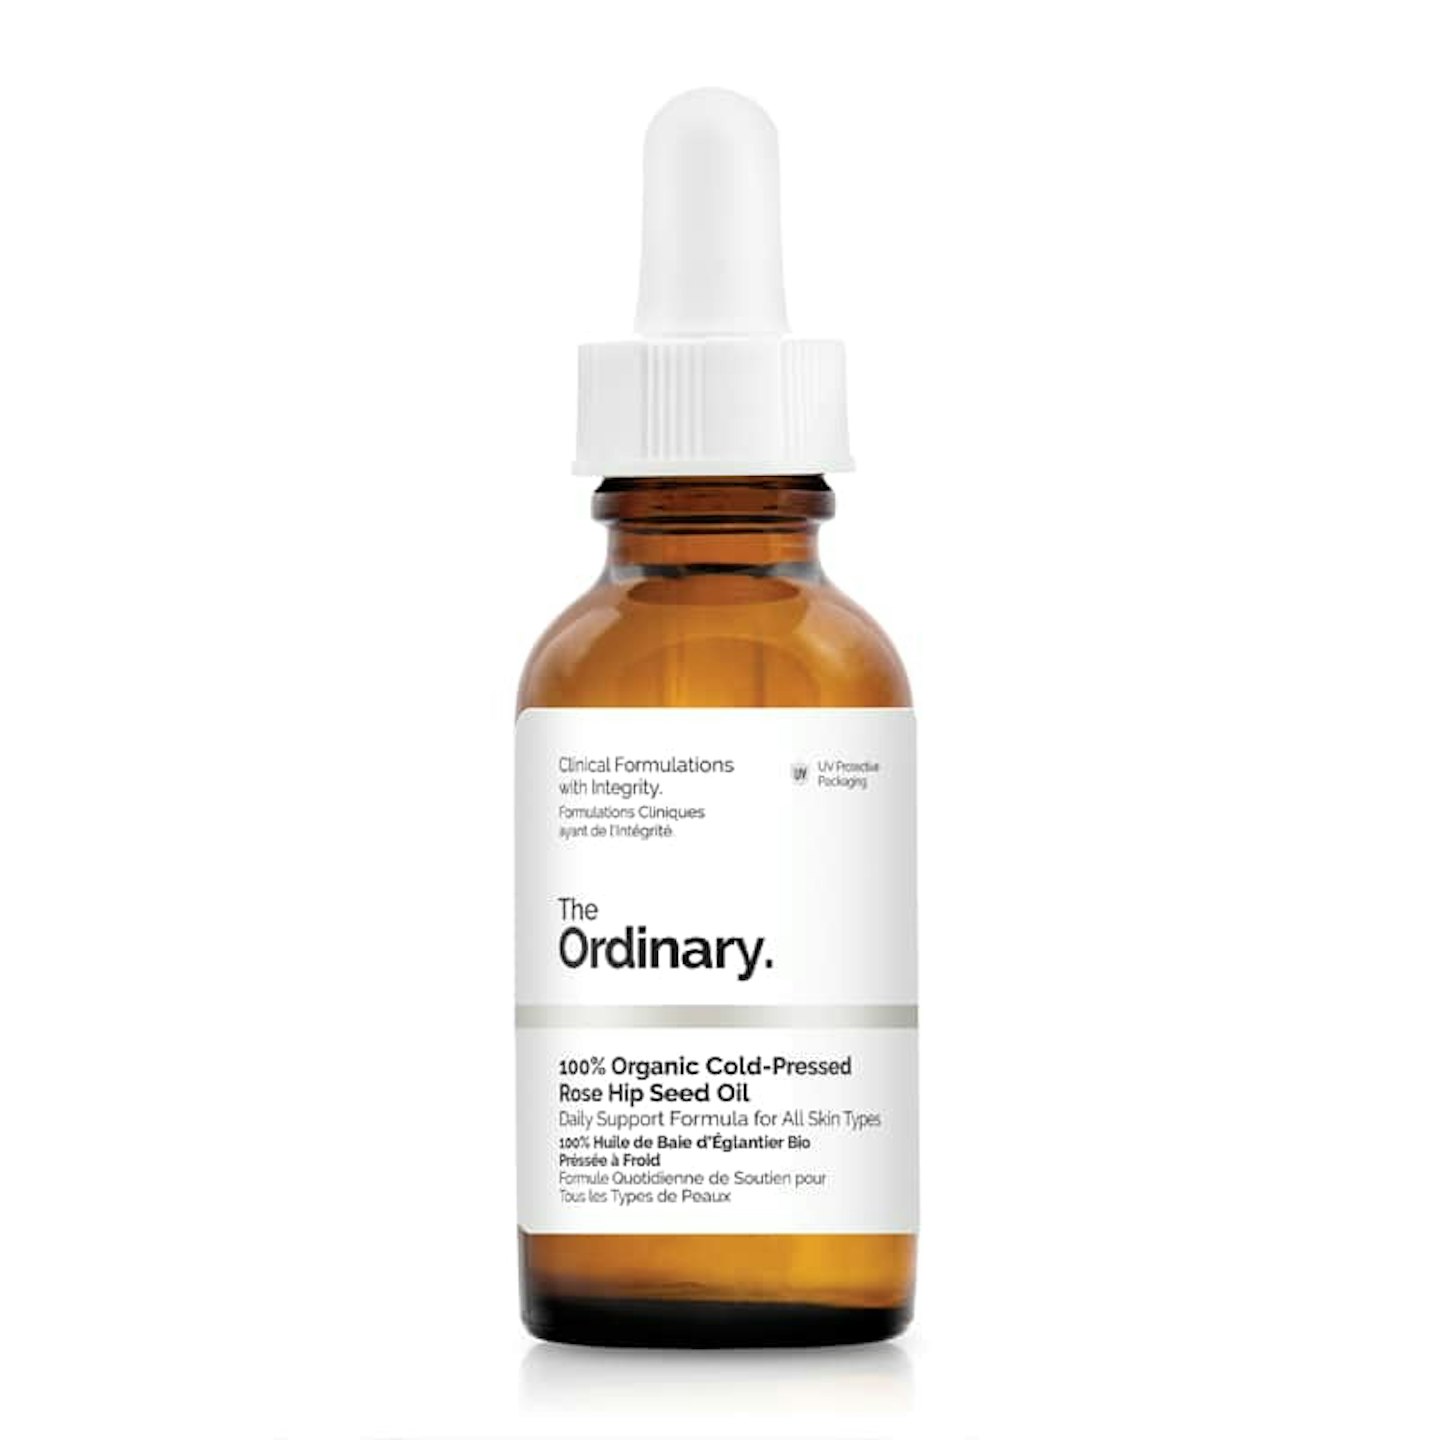 The Ordinary 100% Organic Cold-Pressed Rose Hip Seed Oil, £9.30